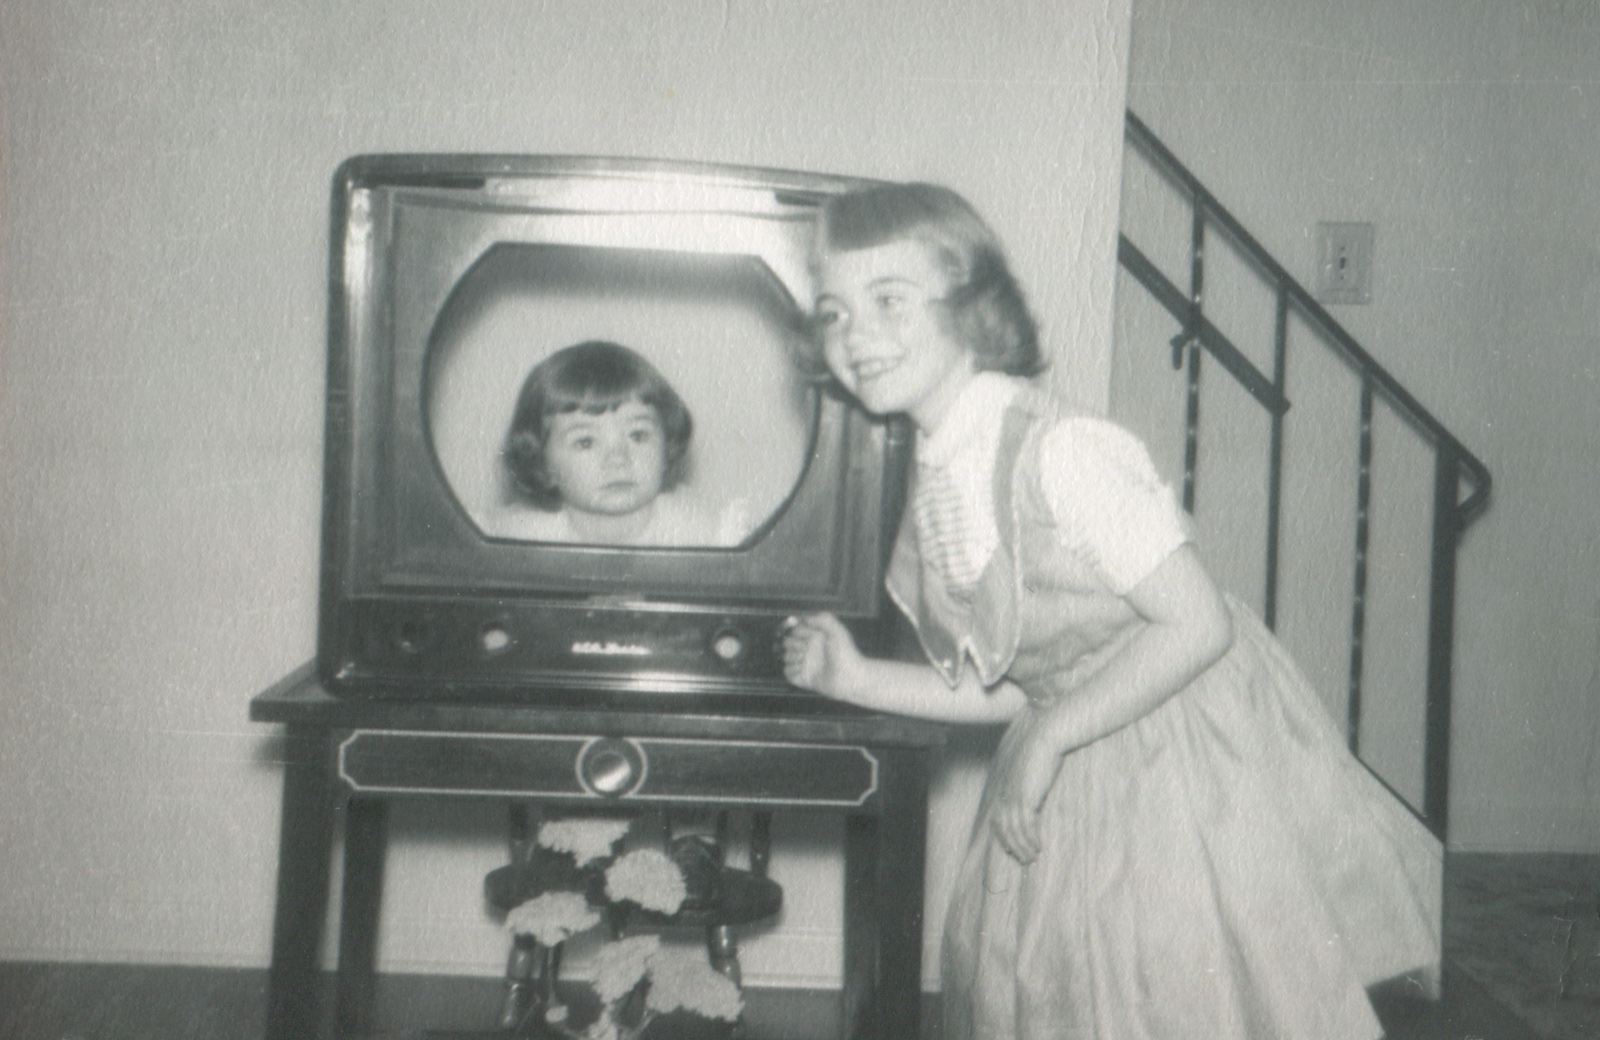 Young girl posing with younger girl in a hollowed-out TV set